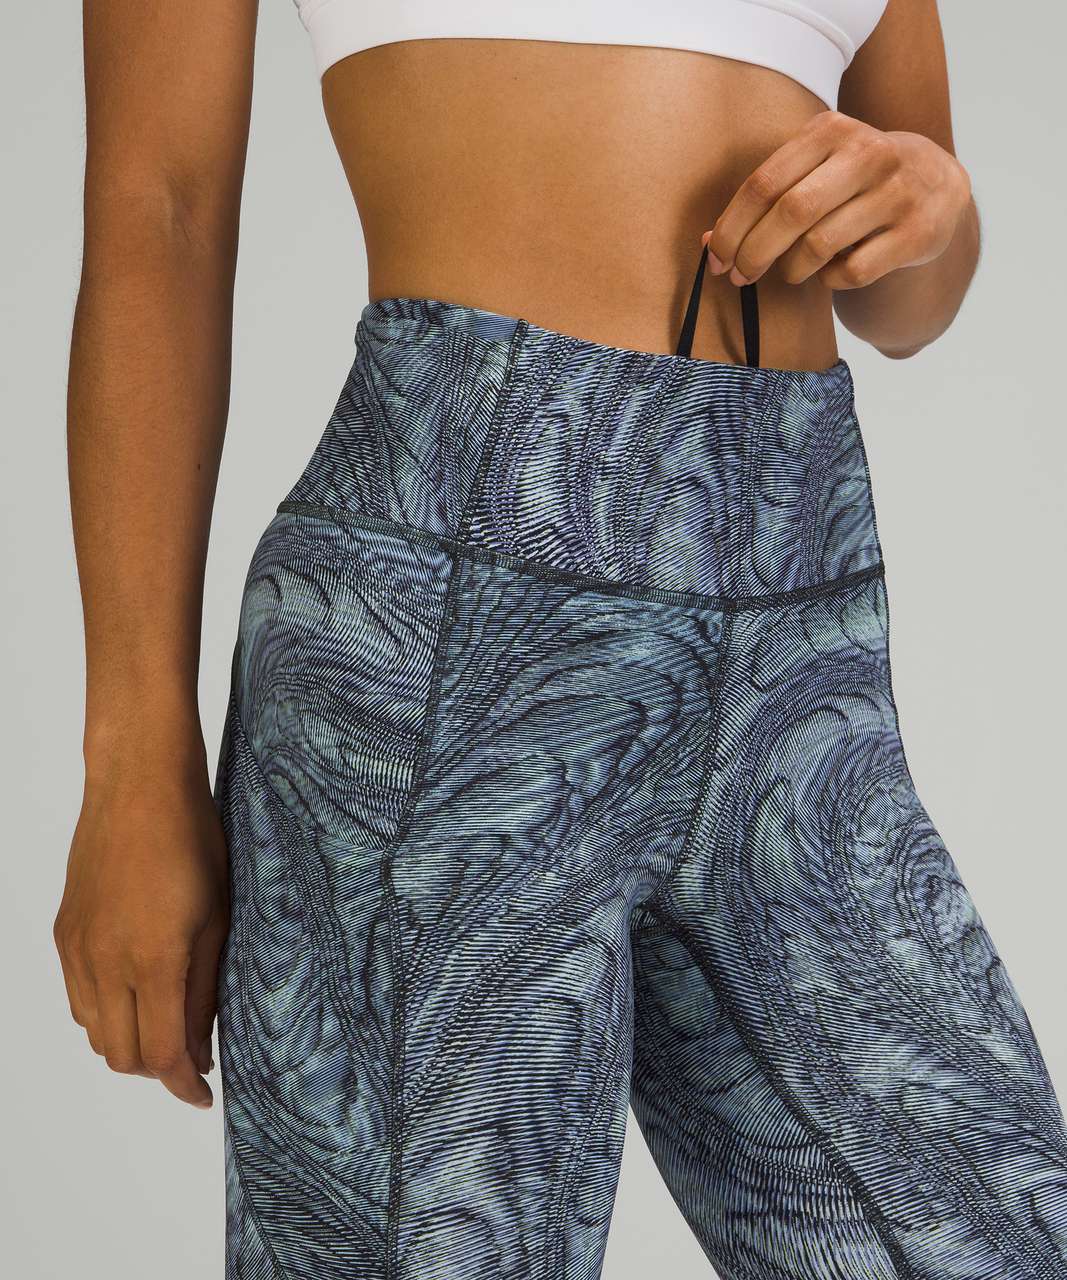 Lululemon Fast and Free High Rise Crop 23 - Dimensional Icing